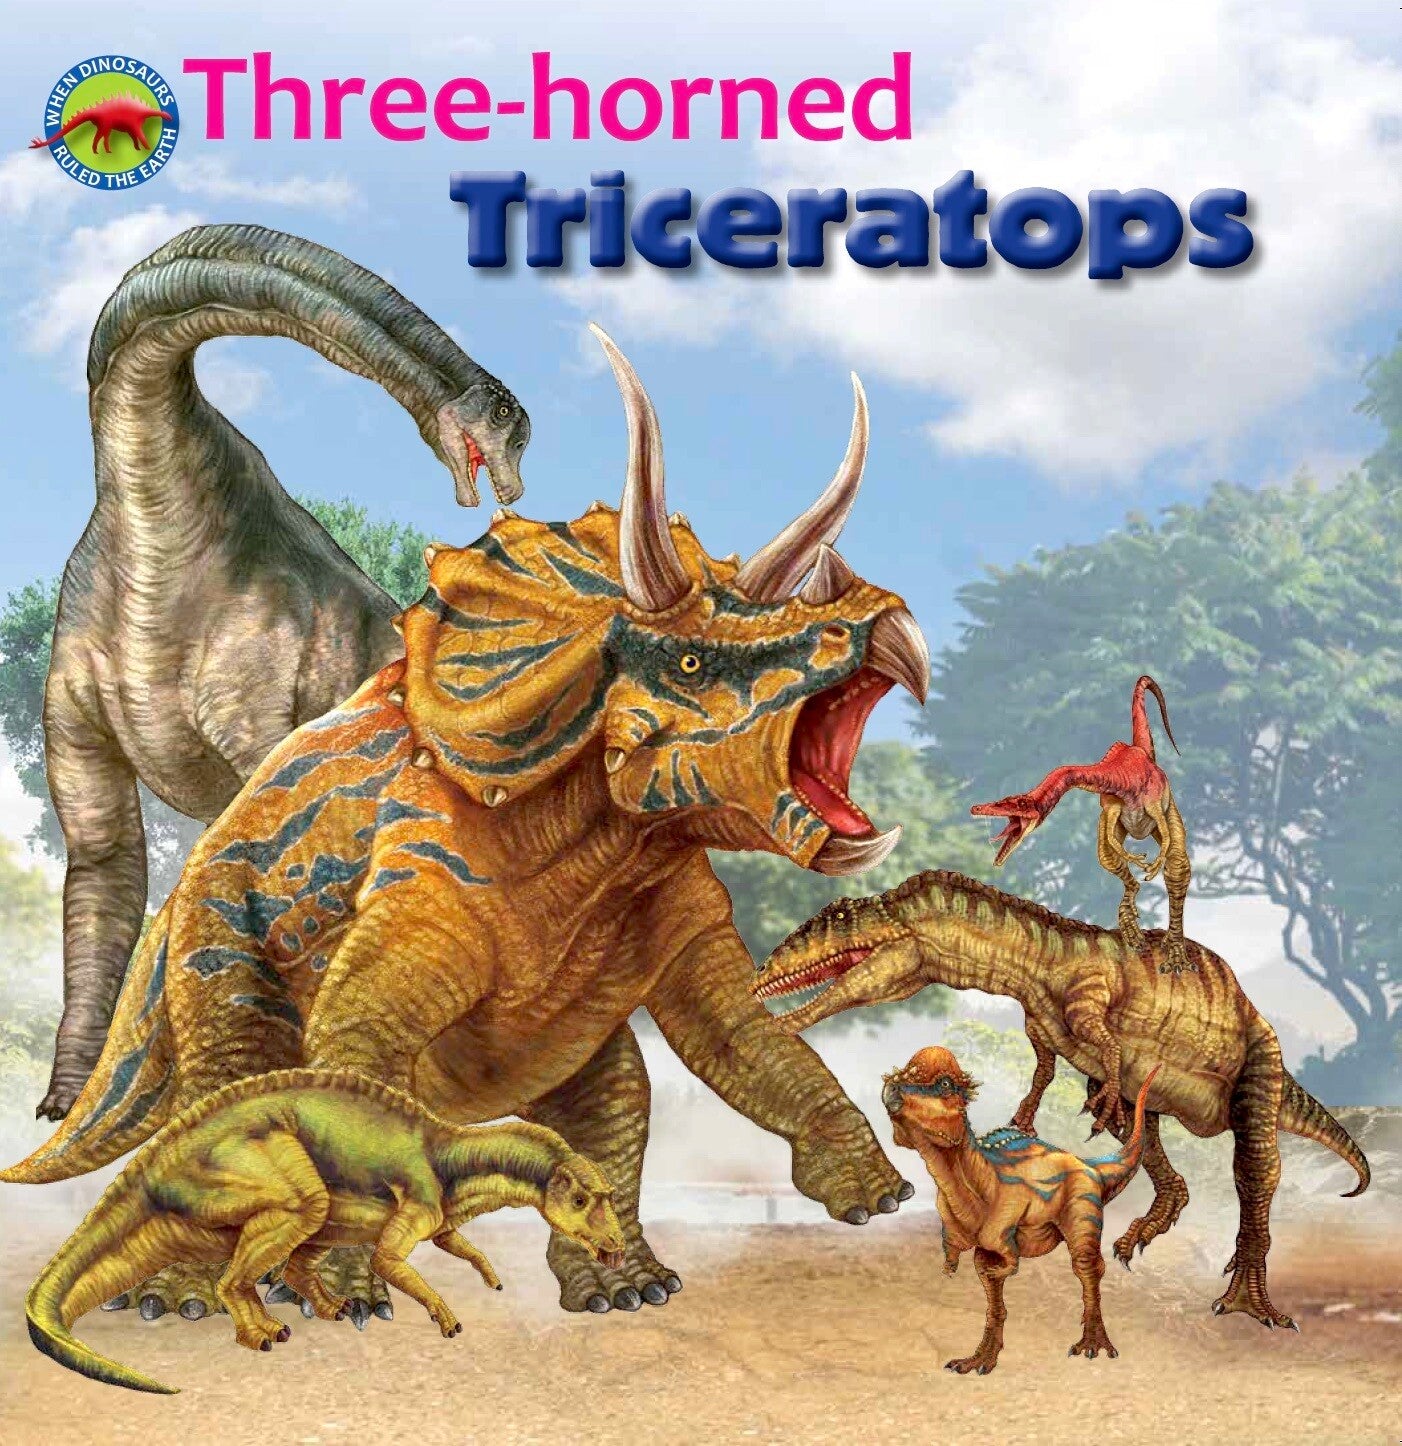 Three-horned Triceratops